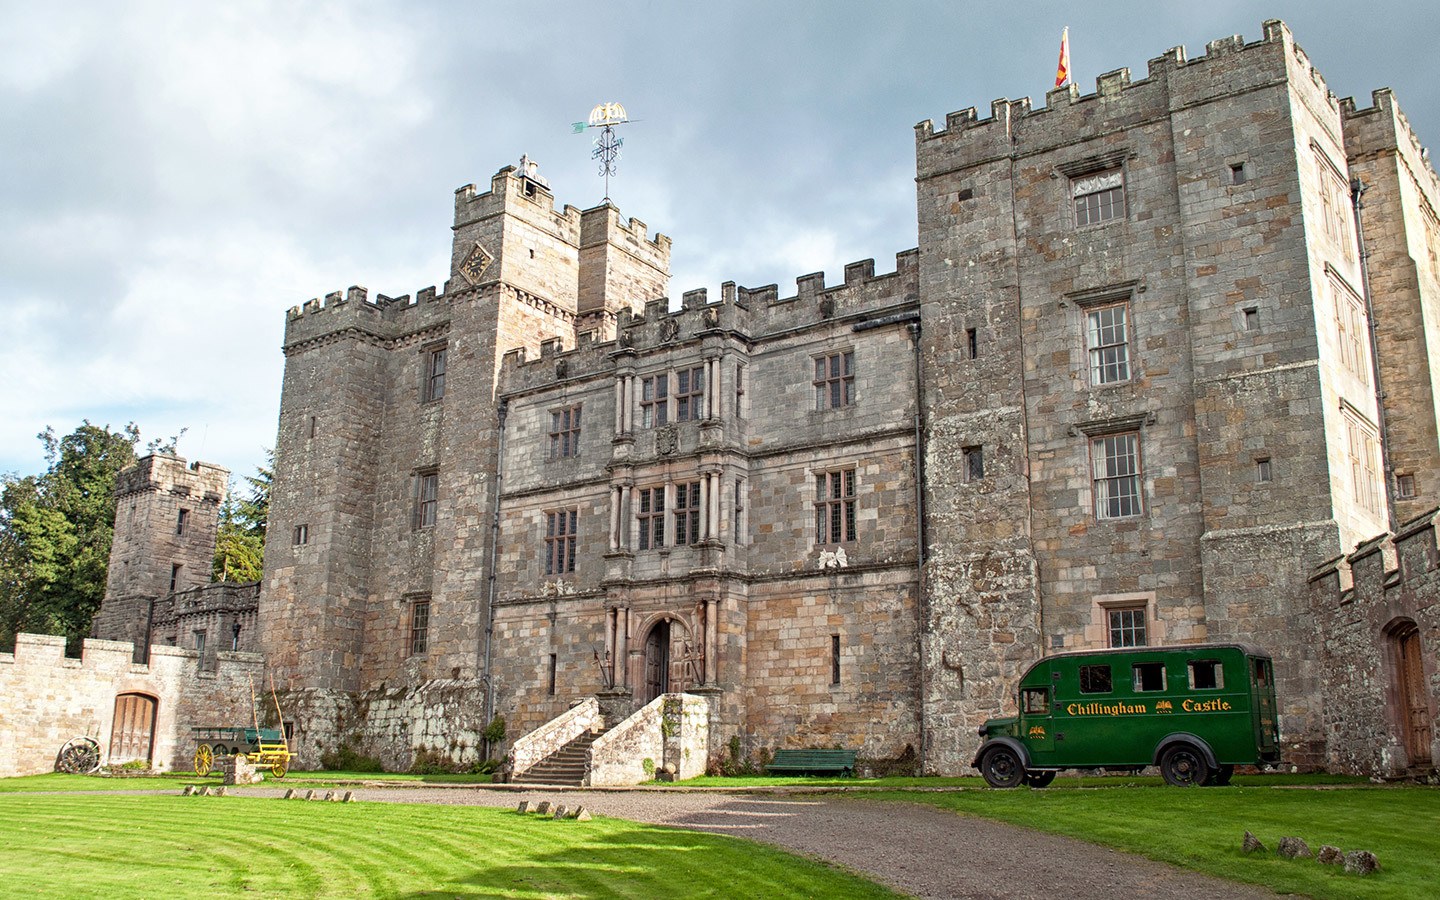 The exteriors of haunted Chillingham Castle